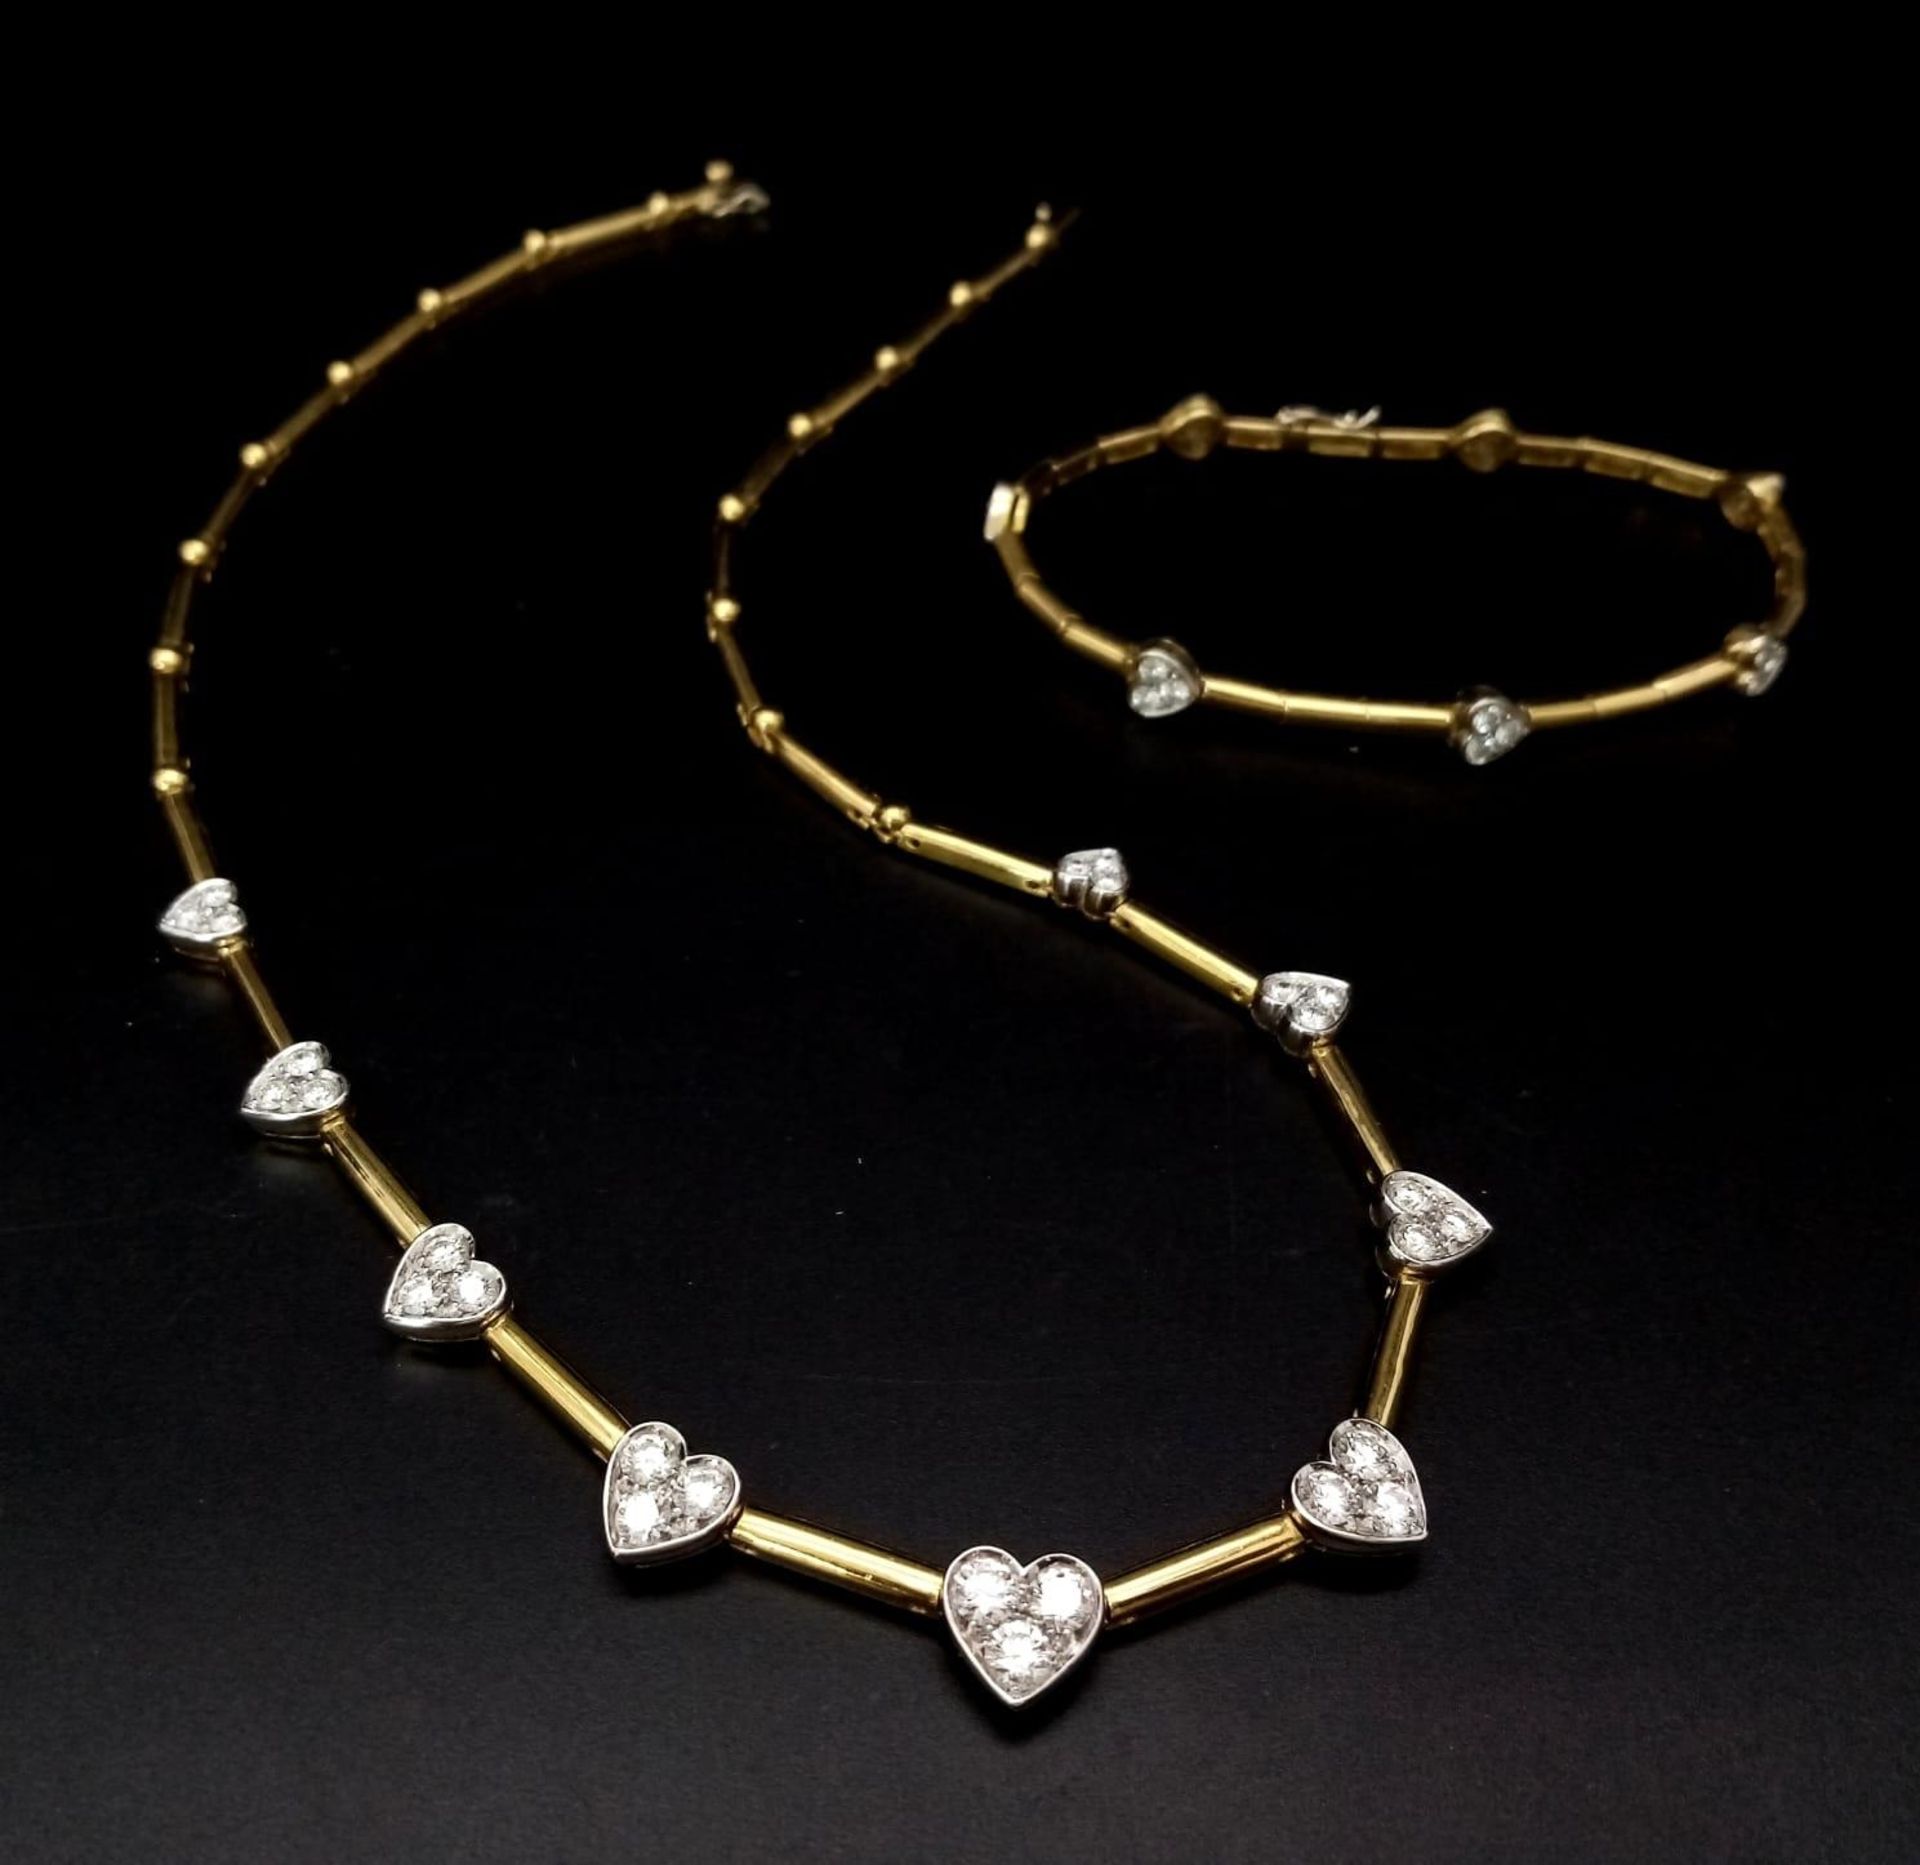 A Gorgeous 18K Gold and Heart-Diamond Necklace and Bracelet Set. The necklace is decorated with - Image 16 of 21